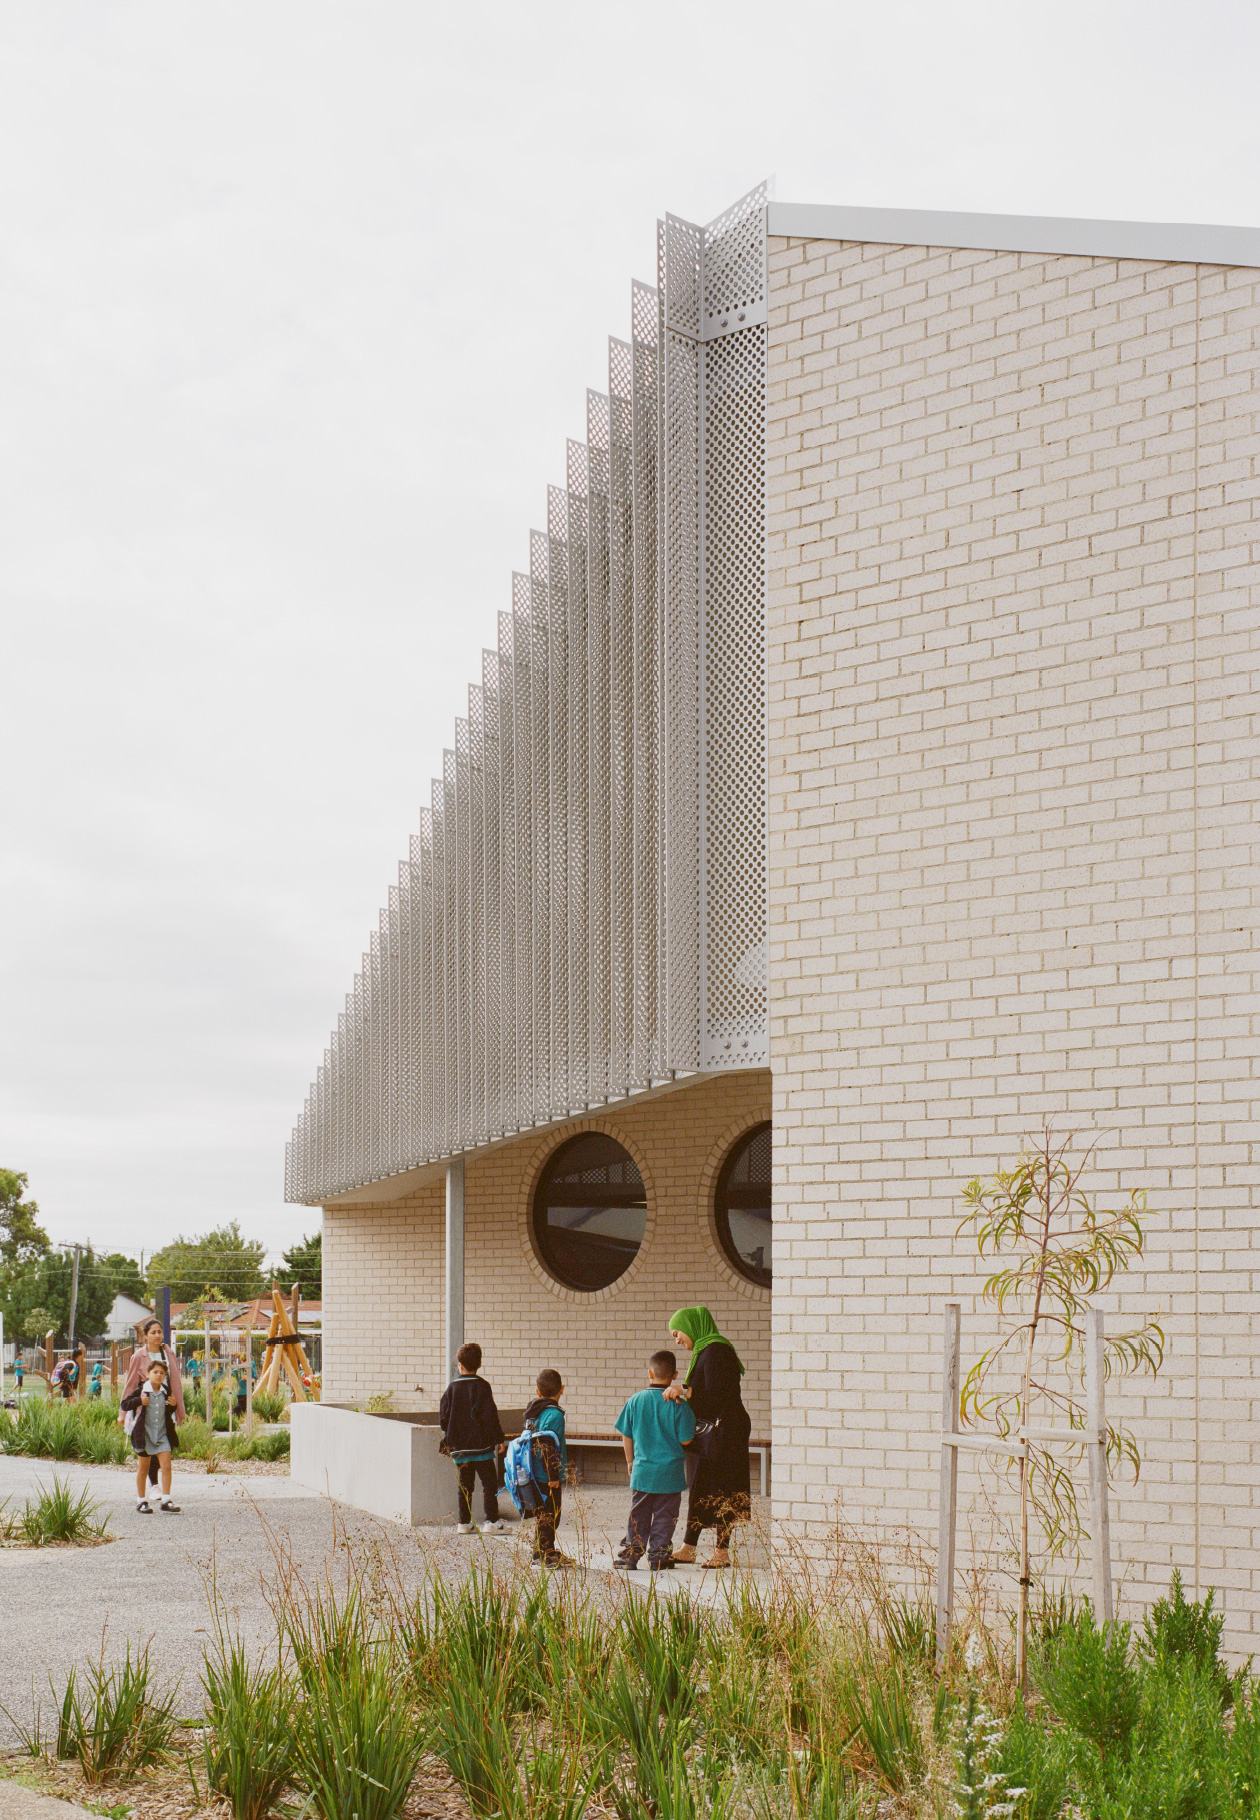 Meadows Primary School by Project 12 Architecture